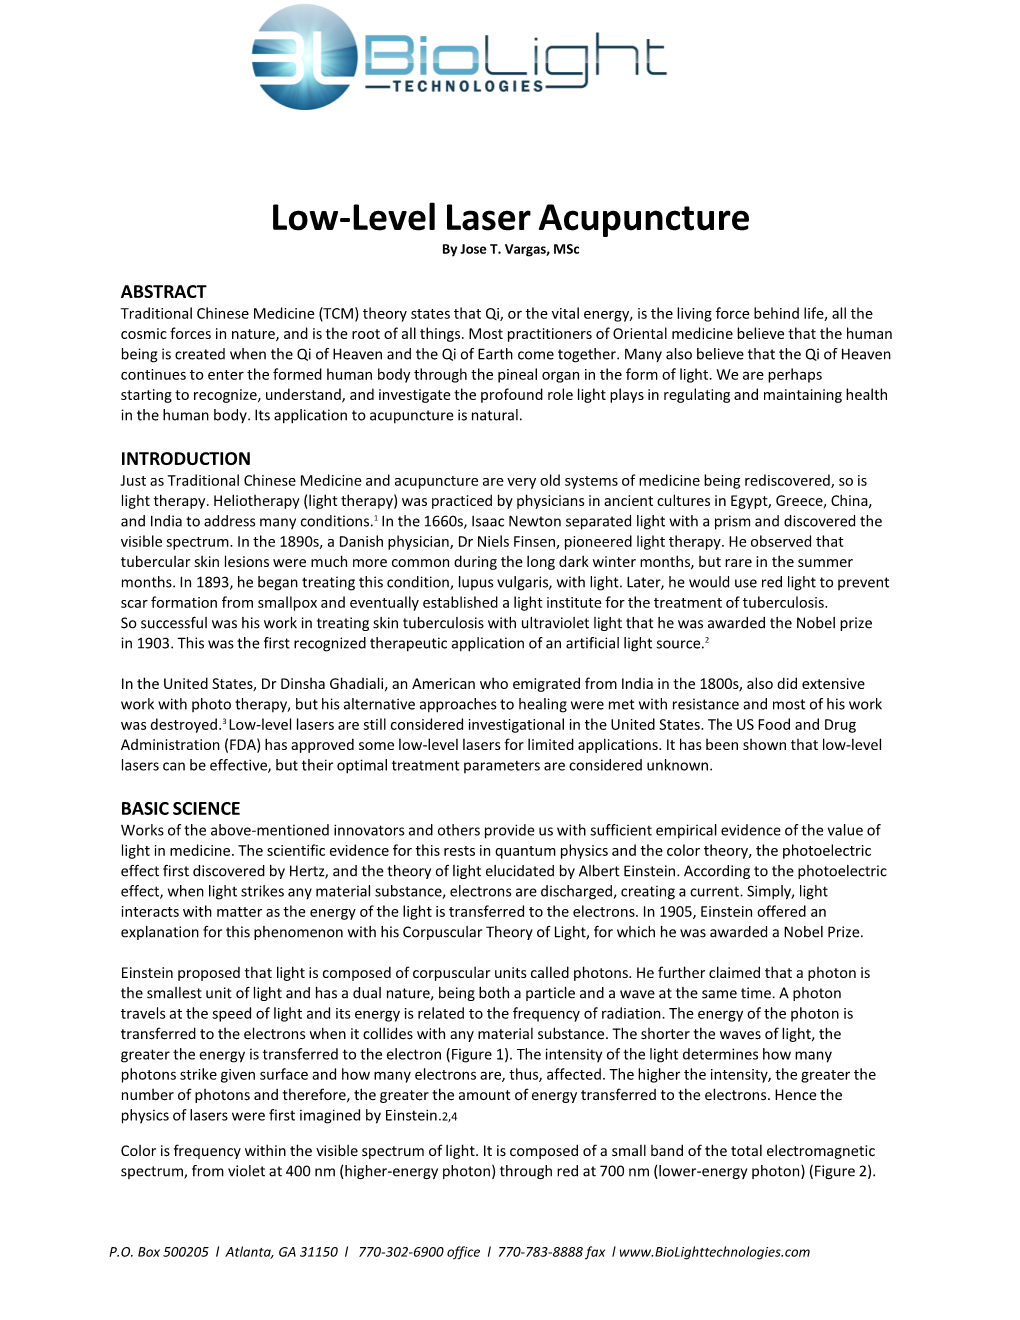 Low-Level Laser Acupuncture by Jose T